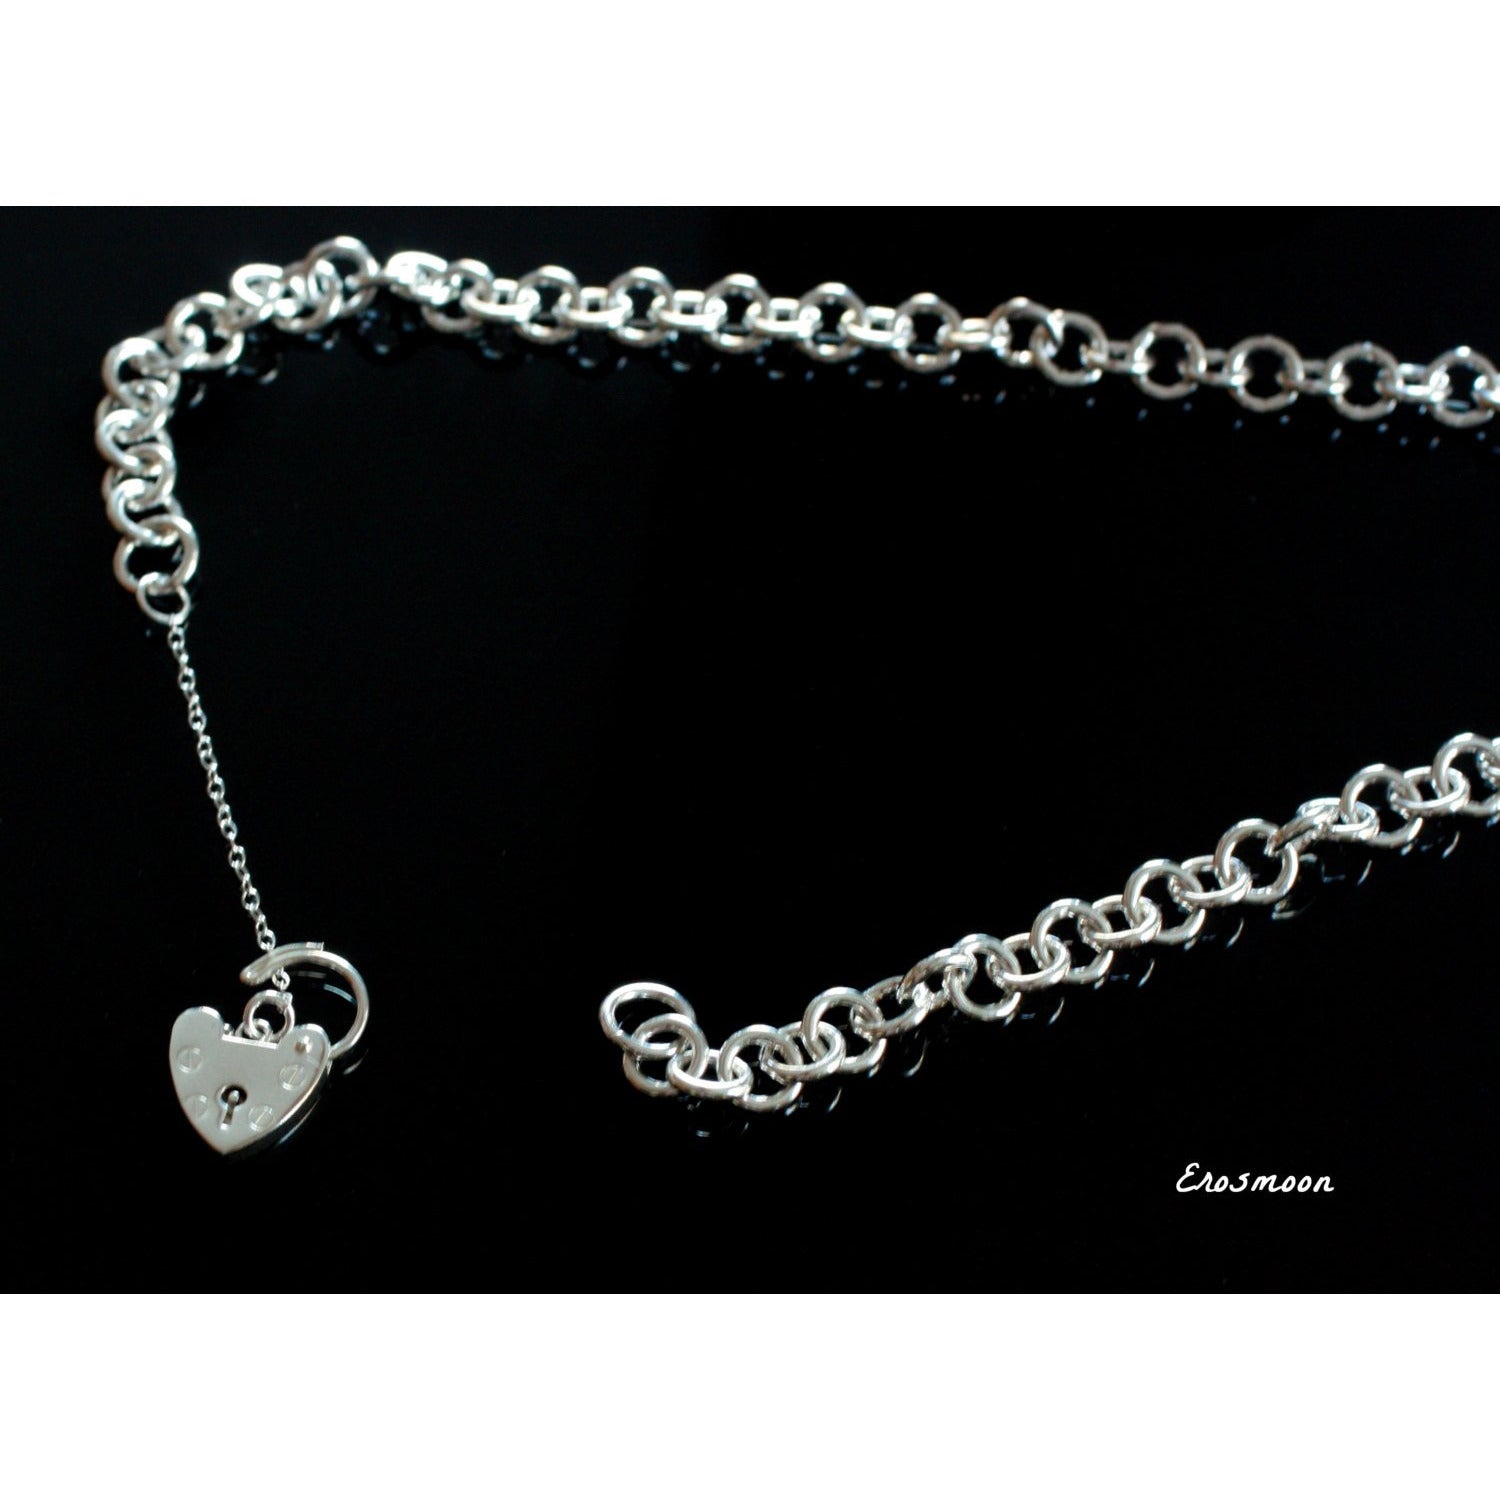 Sterling Silver Chain, Day Collar, Necklace collar, Vintage style, sterling silver padlock clasp